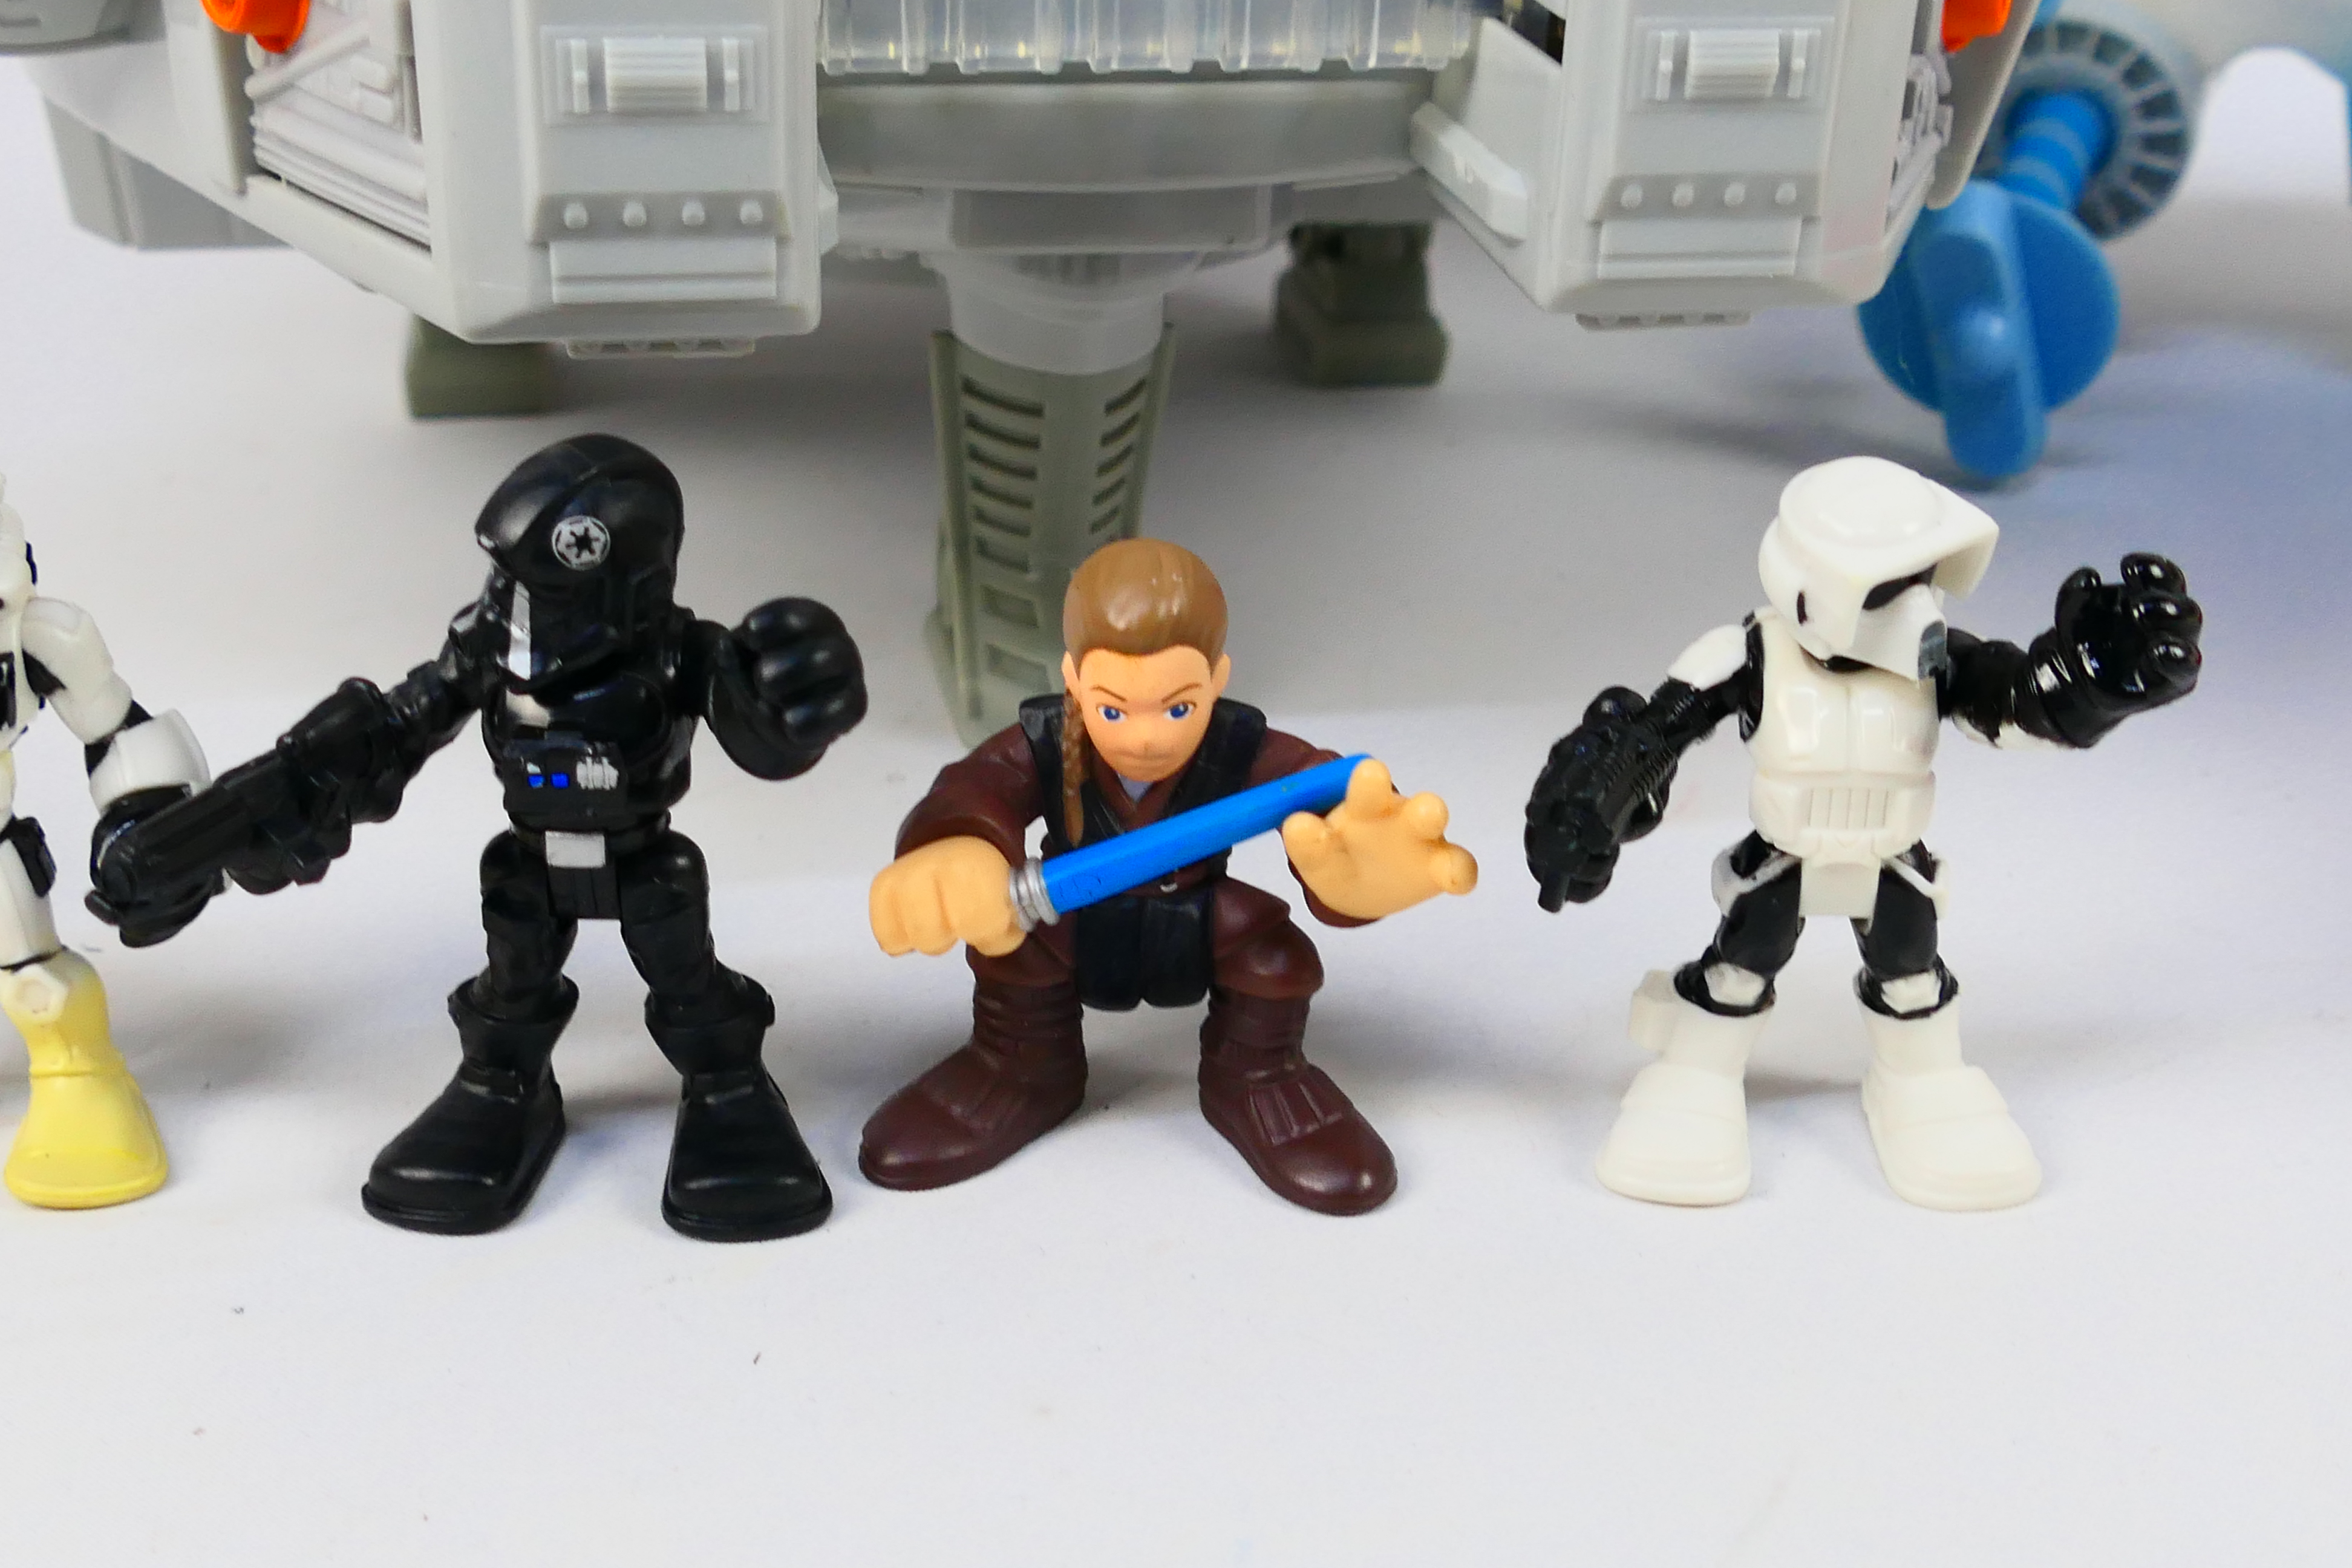 Hasbro - Star Wars - A Star Wars Millennium Falcon Plat Set with figures including Hans, - Image 3 of 13